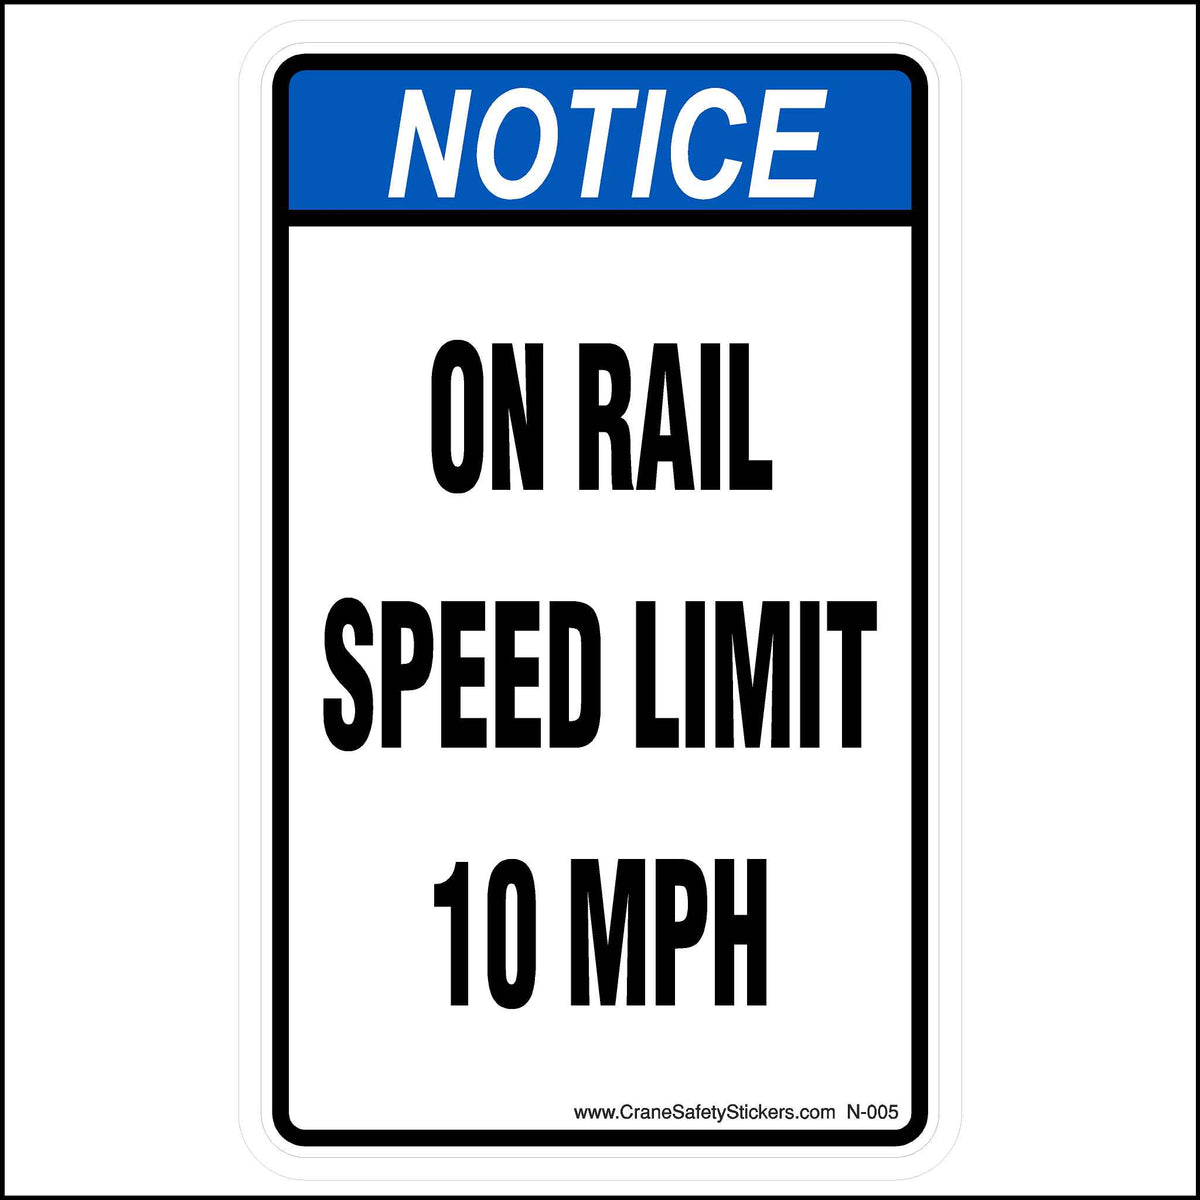 This, On rail speed limit 10 MPH sticker is printed with blue and white notice symbol and black lettering on white background.